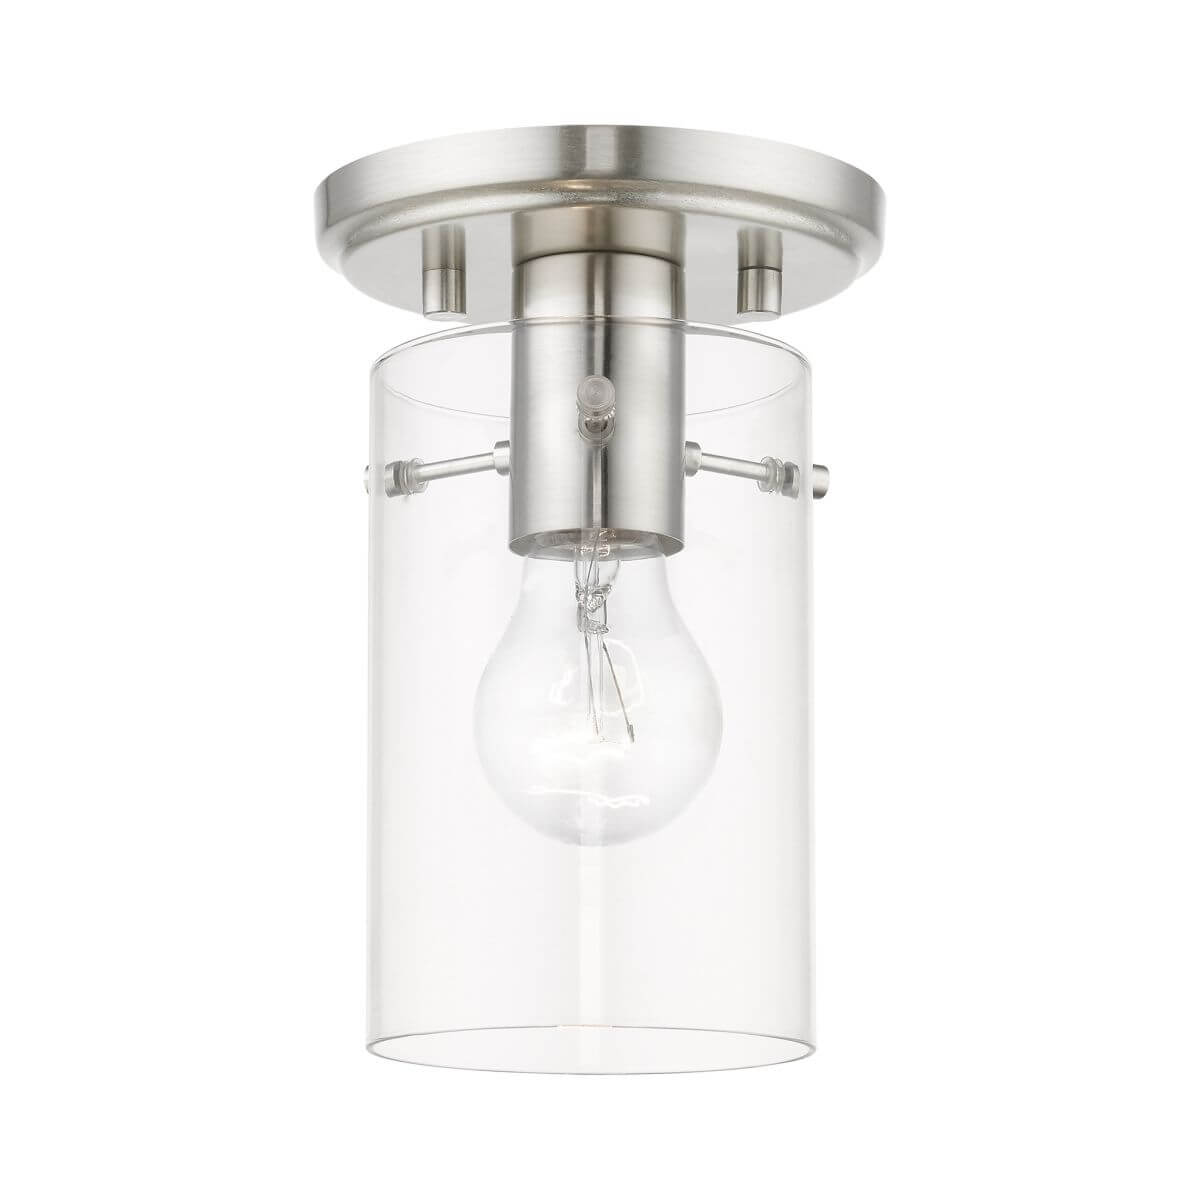 Livex 46150-91 Munich 1 Light 5 inch Flush Mount in Brushed Nickel with Clear Glass